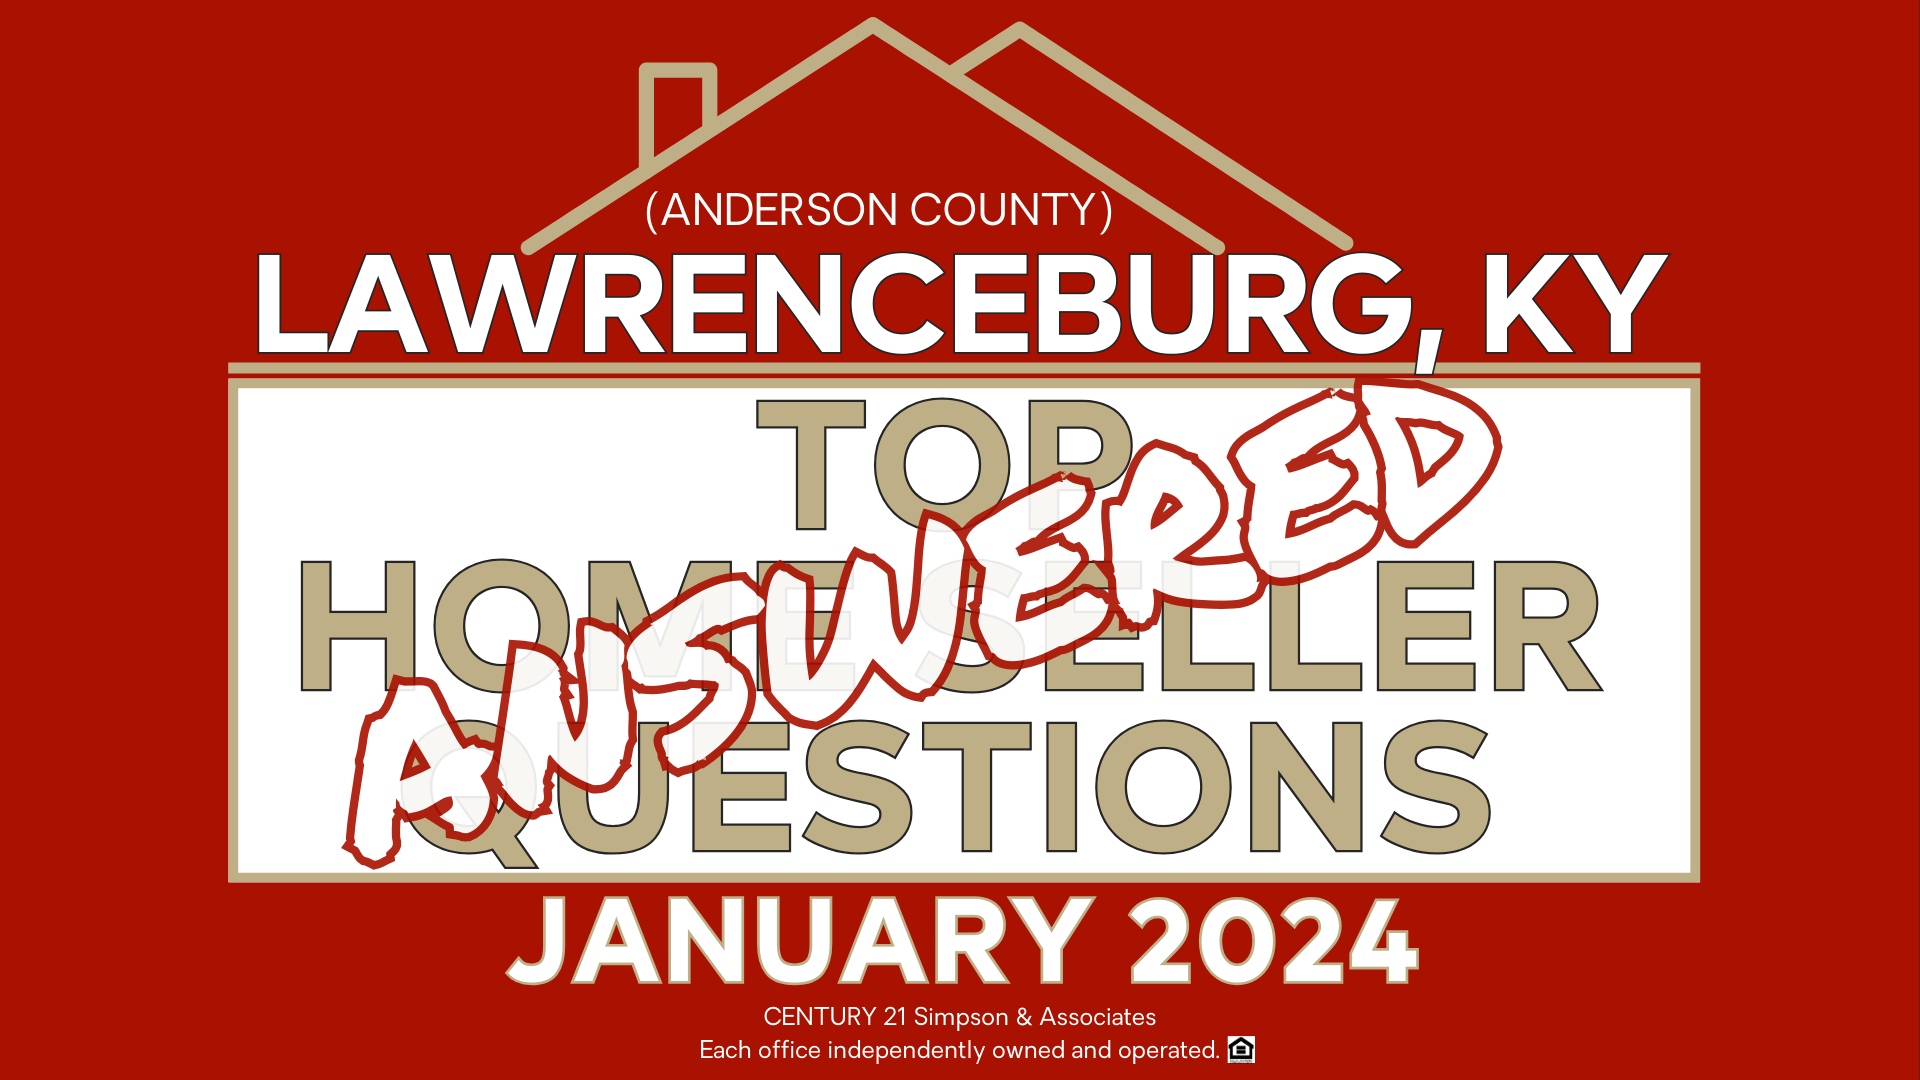 Lawrenceburg-Anderson County KY Home Seller Questions Answered